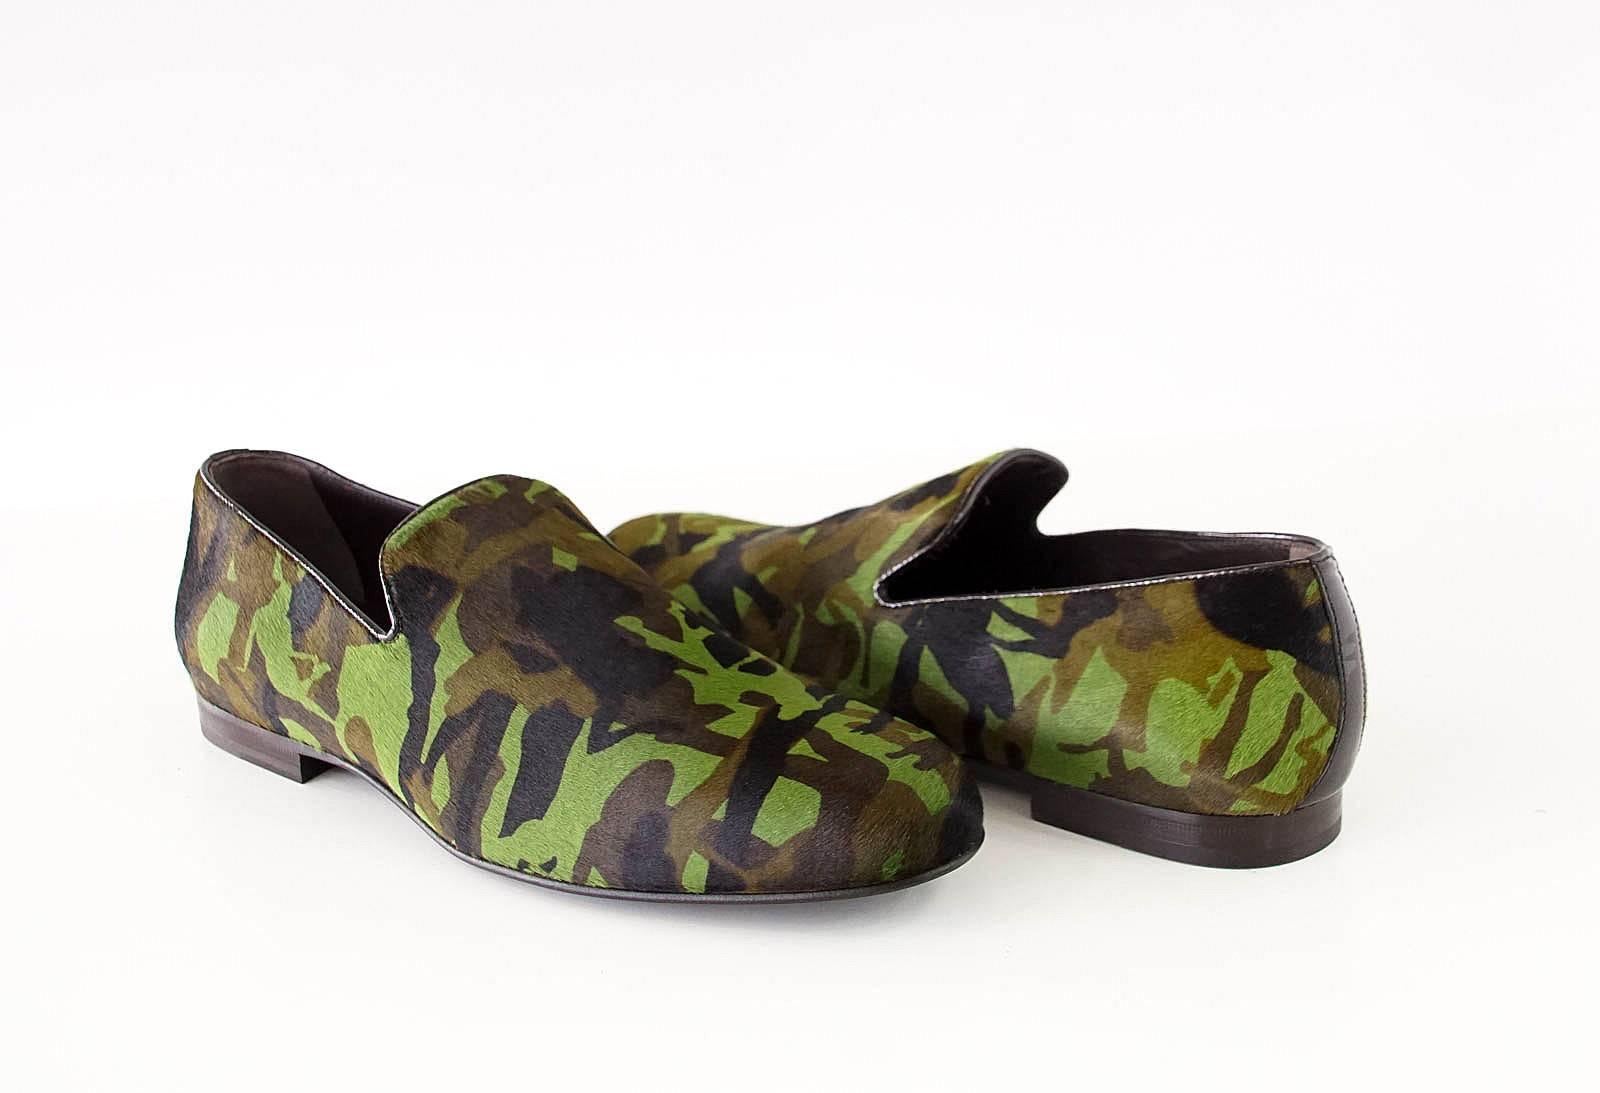 Guaranteed authentic JIMMY CHOO Sloane army green camouflage loafer.
Men's calf hair Sloane loafer green camouflage - runway trend.
Comes with box and sleeper.
NEW or NEVER WORN. 
final sale

SIZE 43
USA SIZE 10

CONDITION:
NEW or NEVER WORN